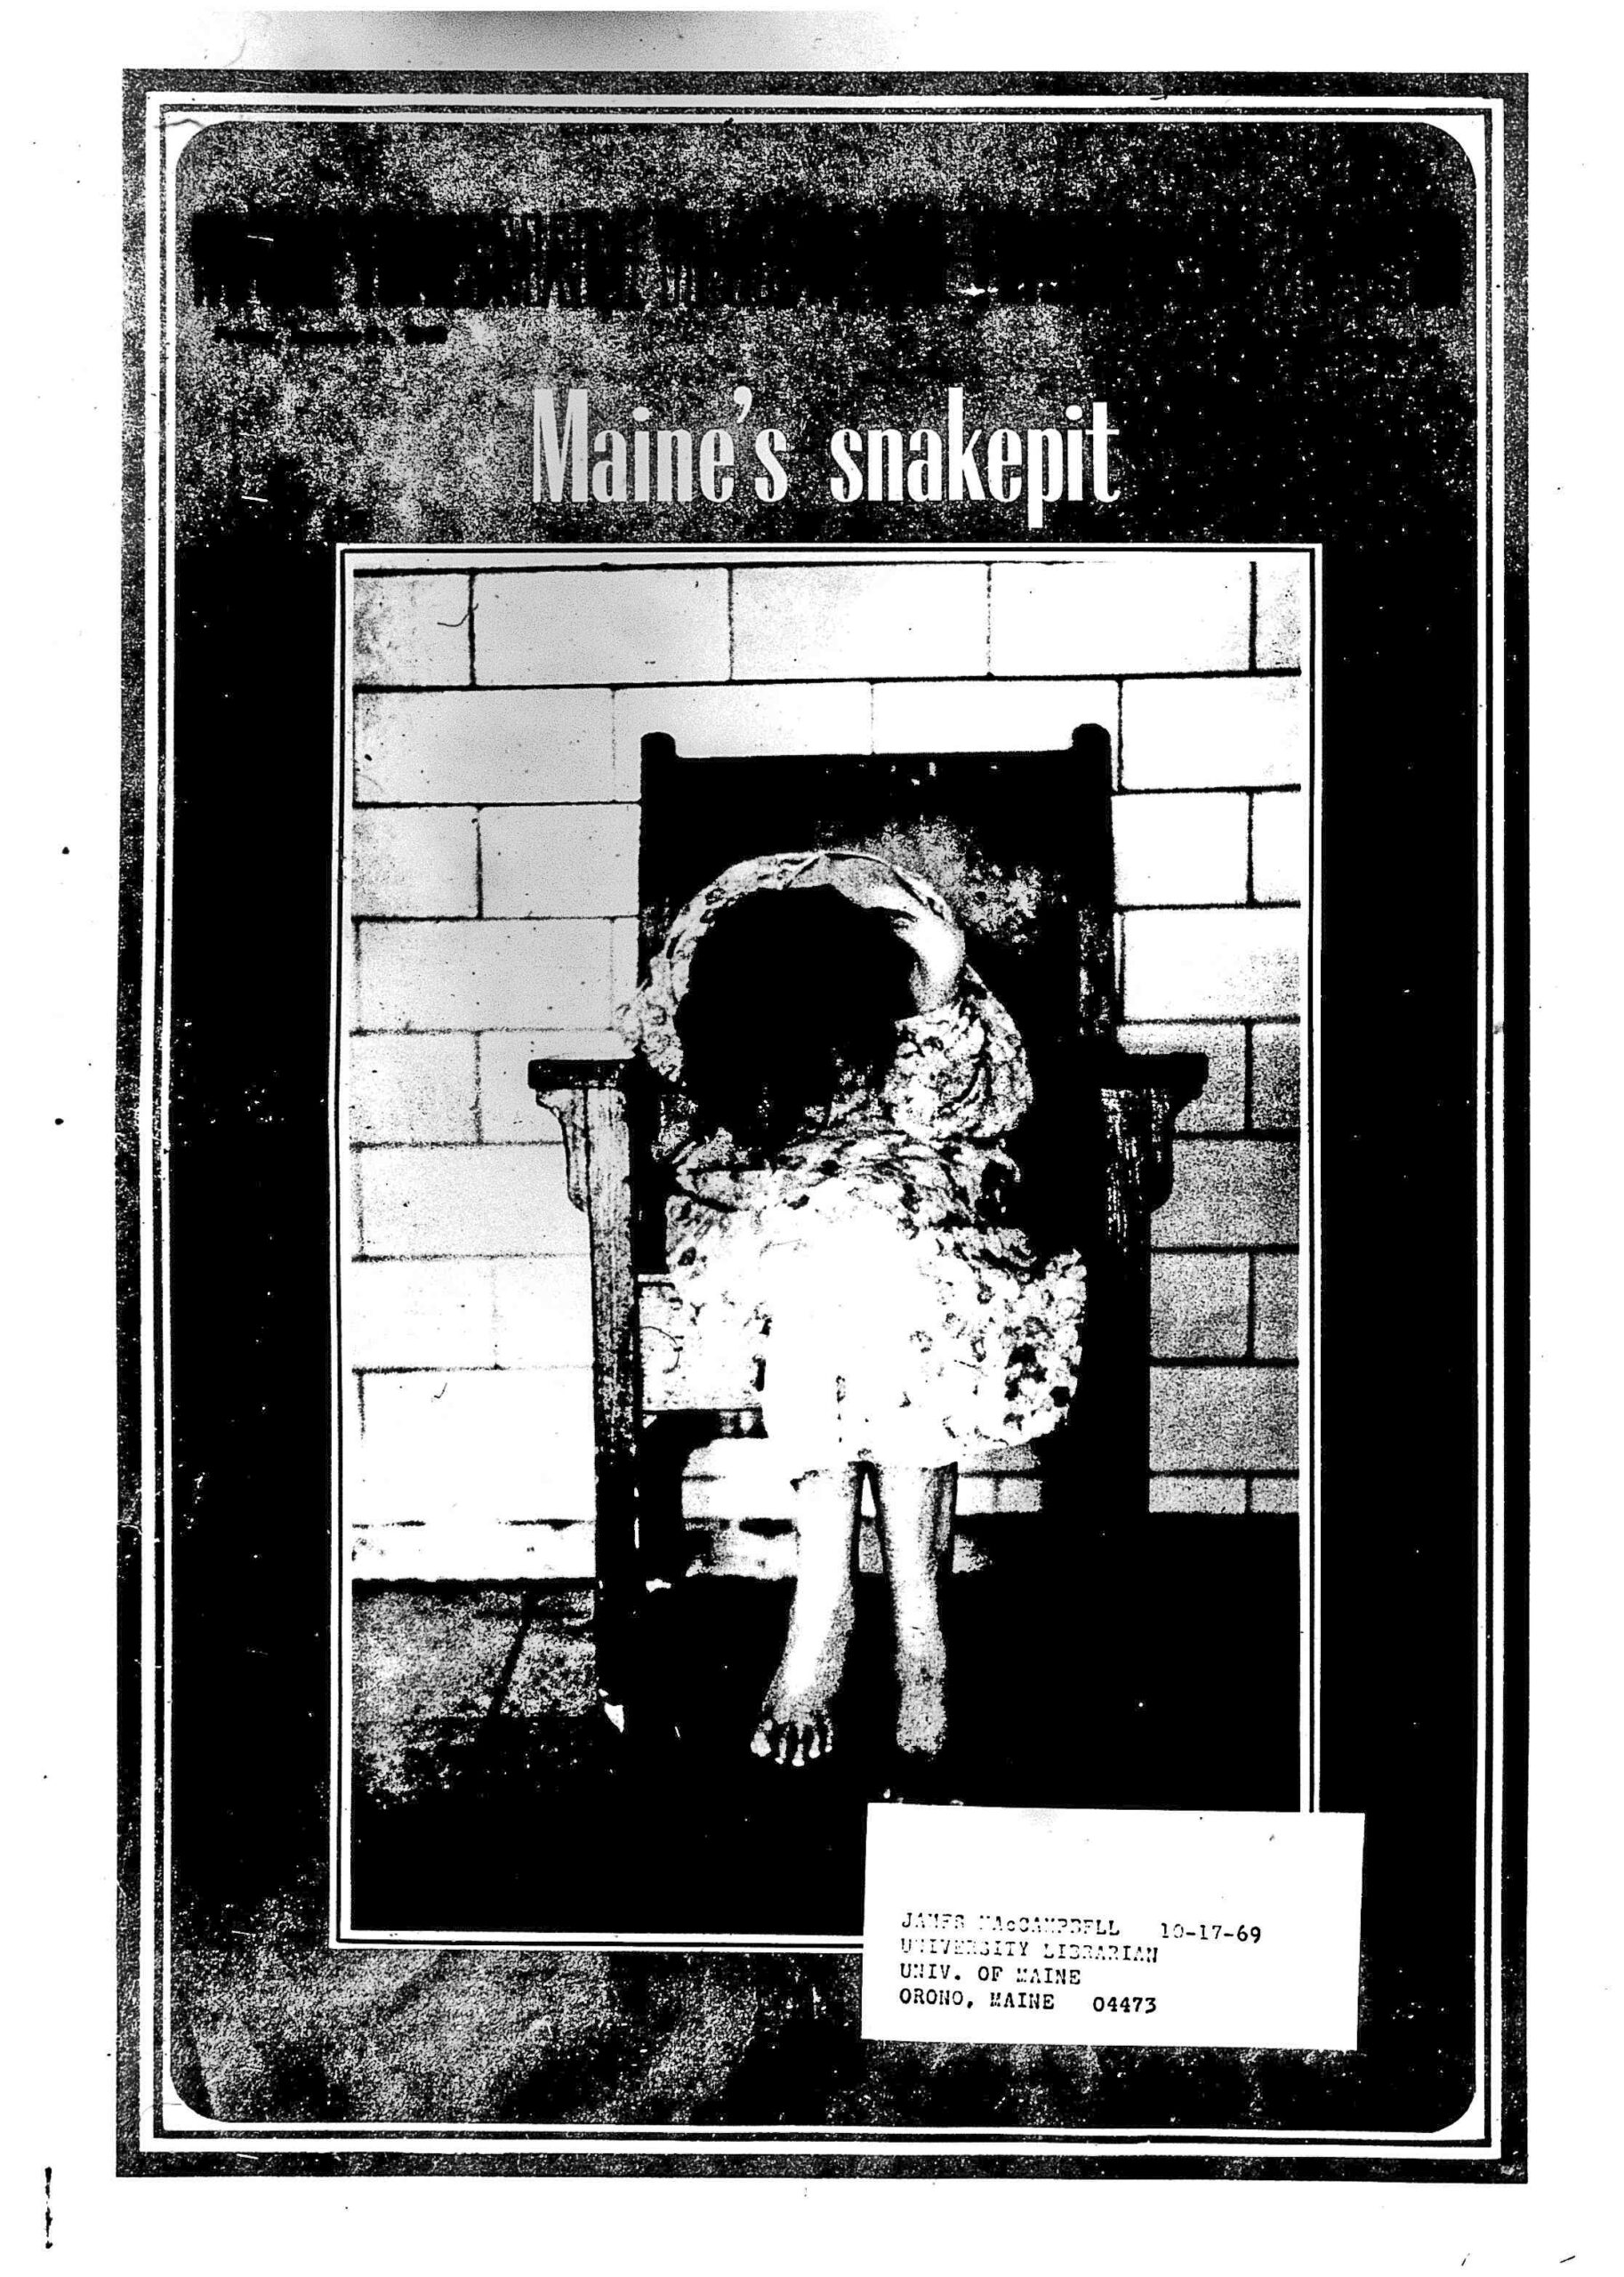 Cover of Maine Times, January 31, 1969, with the headline "Maine's Snakepit". A black and white picture of a barefoot young girl hunched over in a wooden chair in front of a tile wall